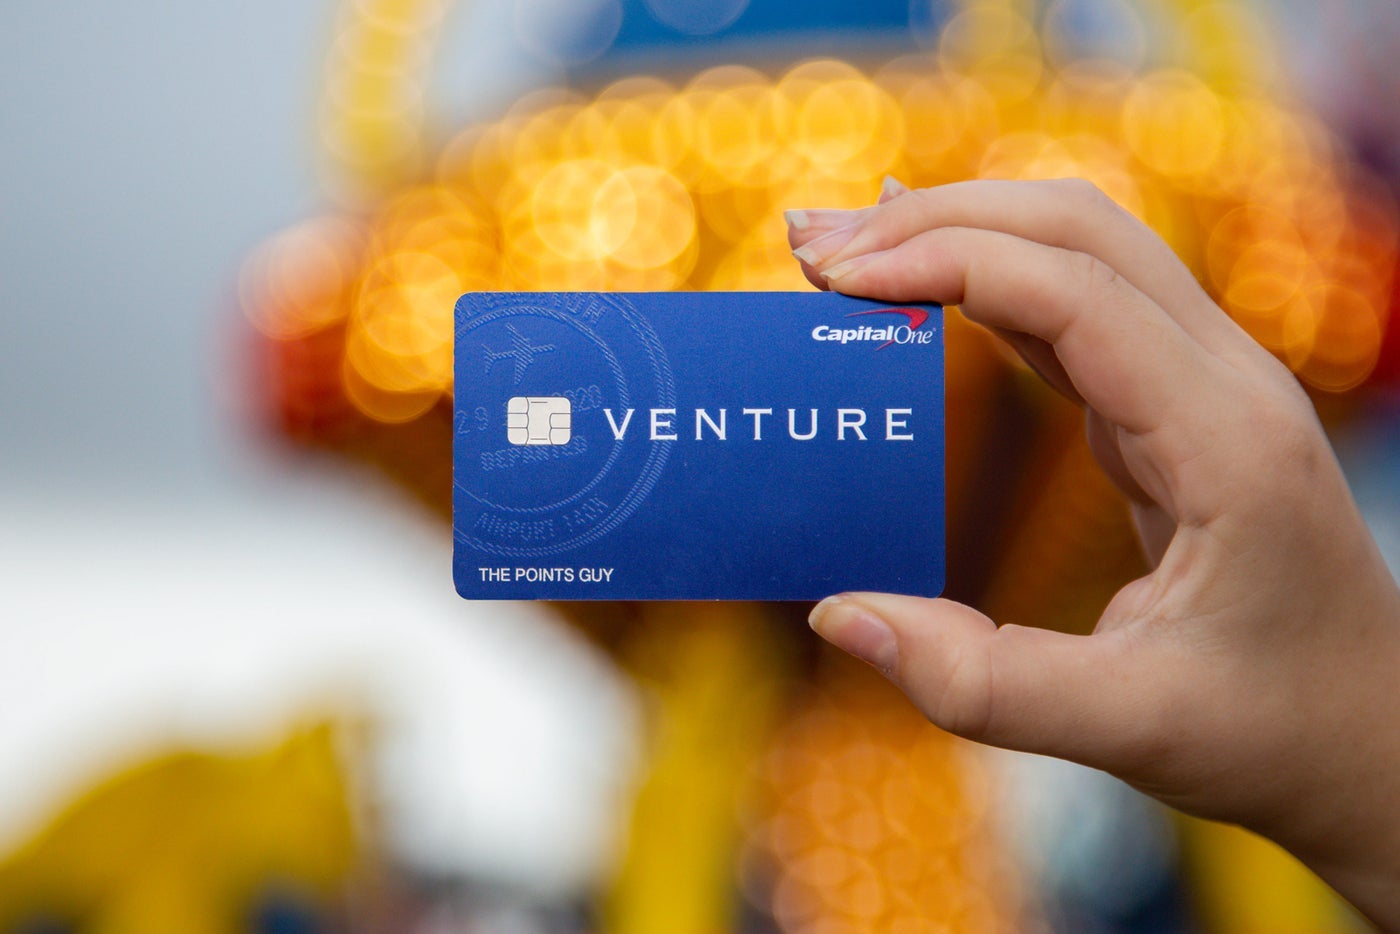 capital one venture card review 2015